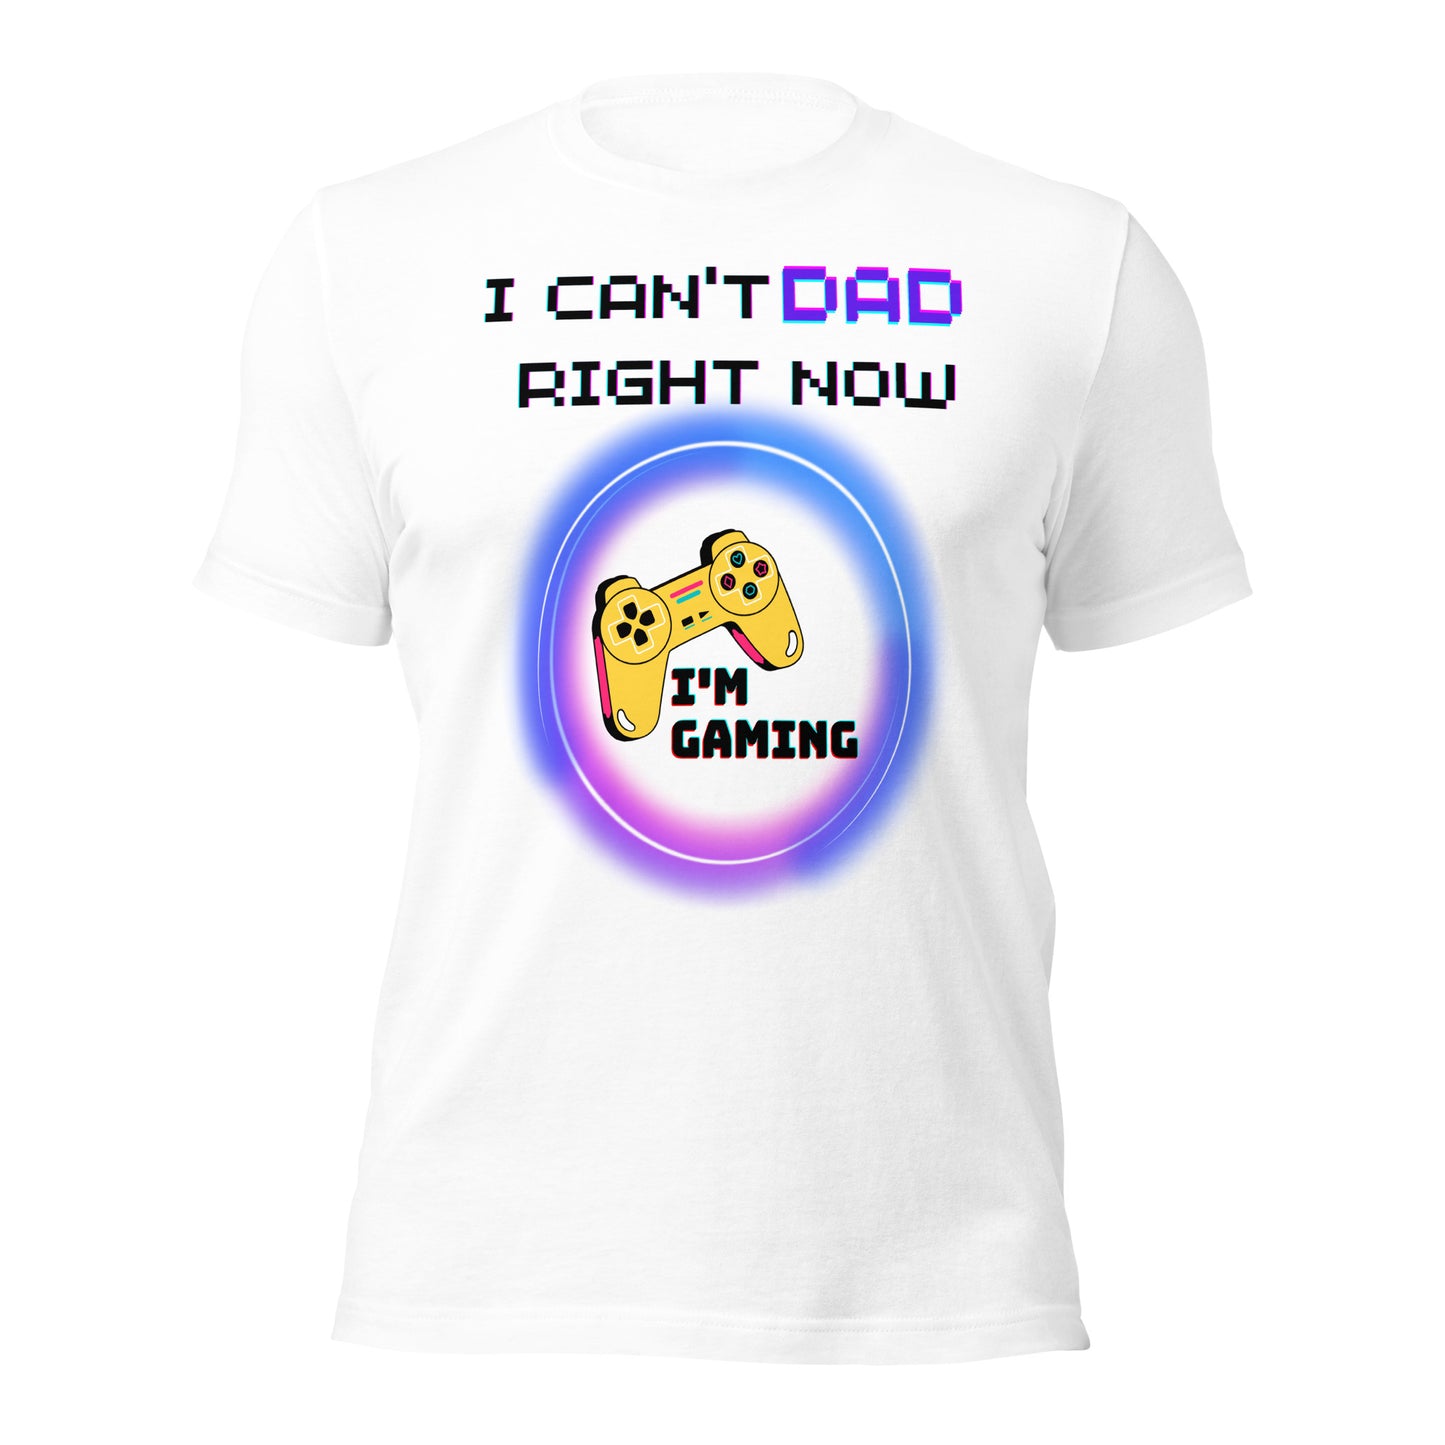 I Can't Dad Right Now I'm Gaming White Tee